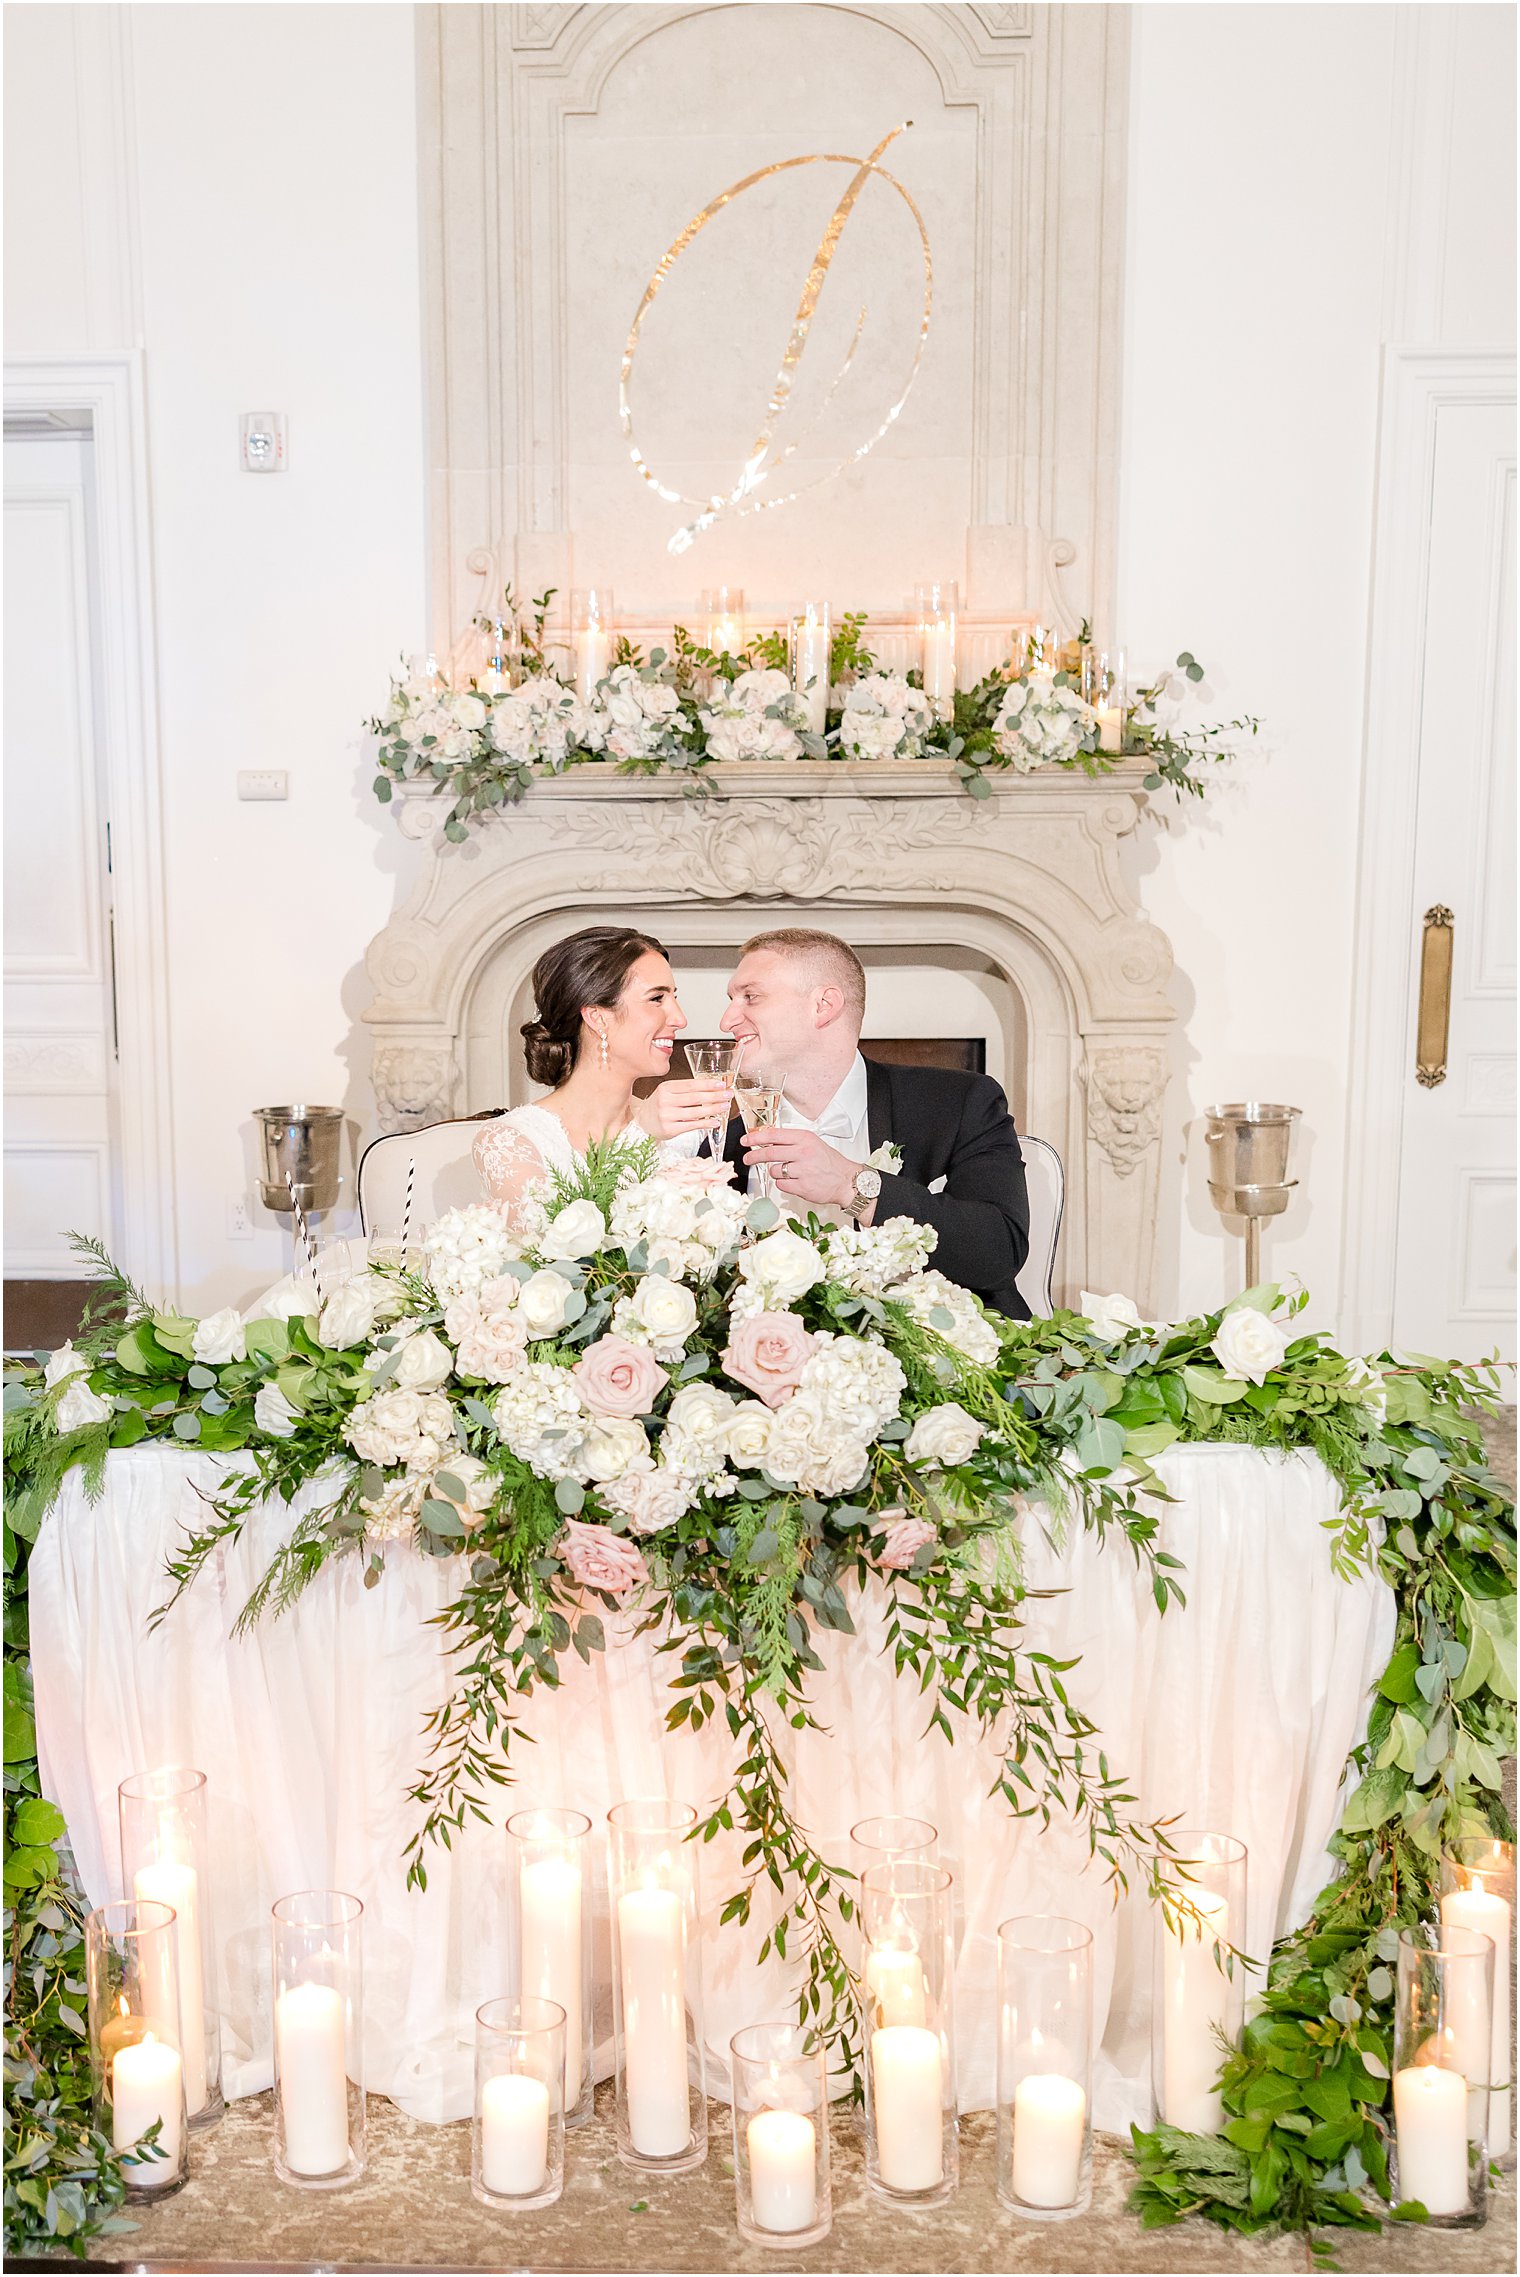 newlyweds kiss at sweetheart table by fireplace at Park Chateau Estate